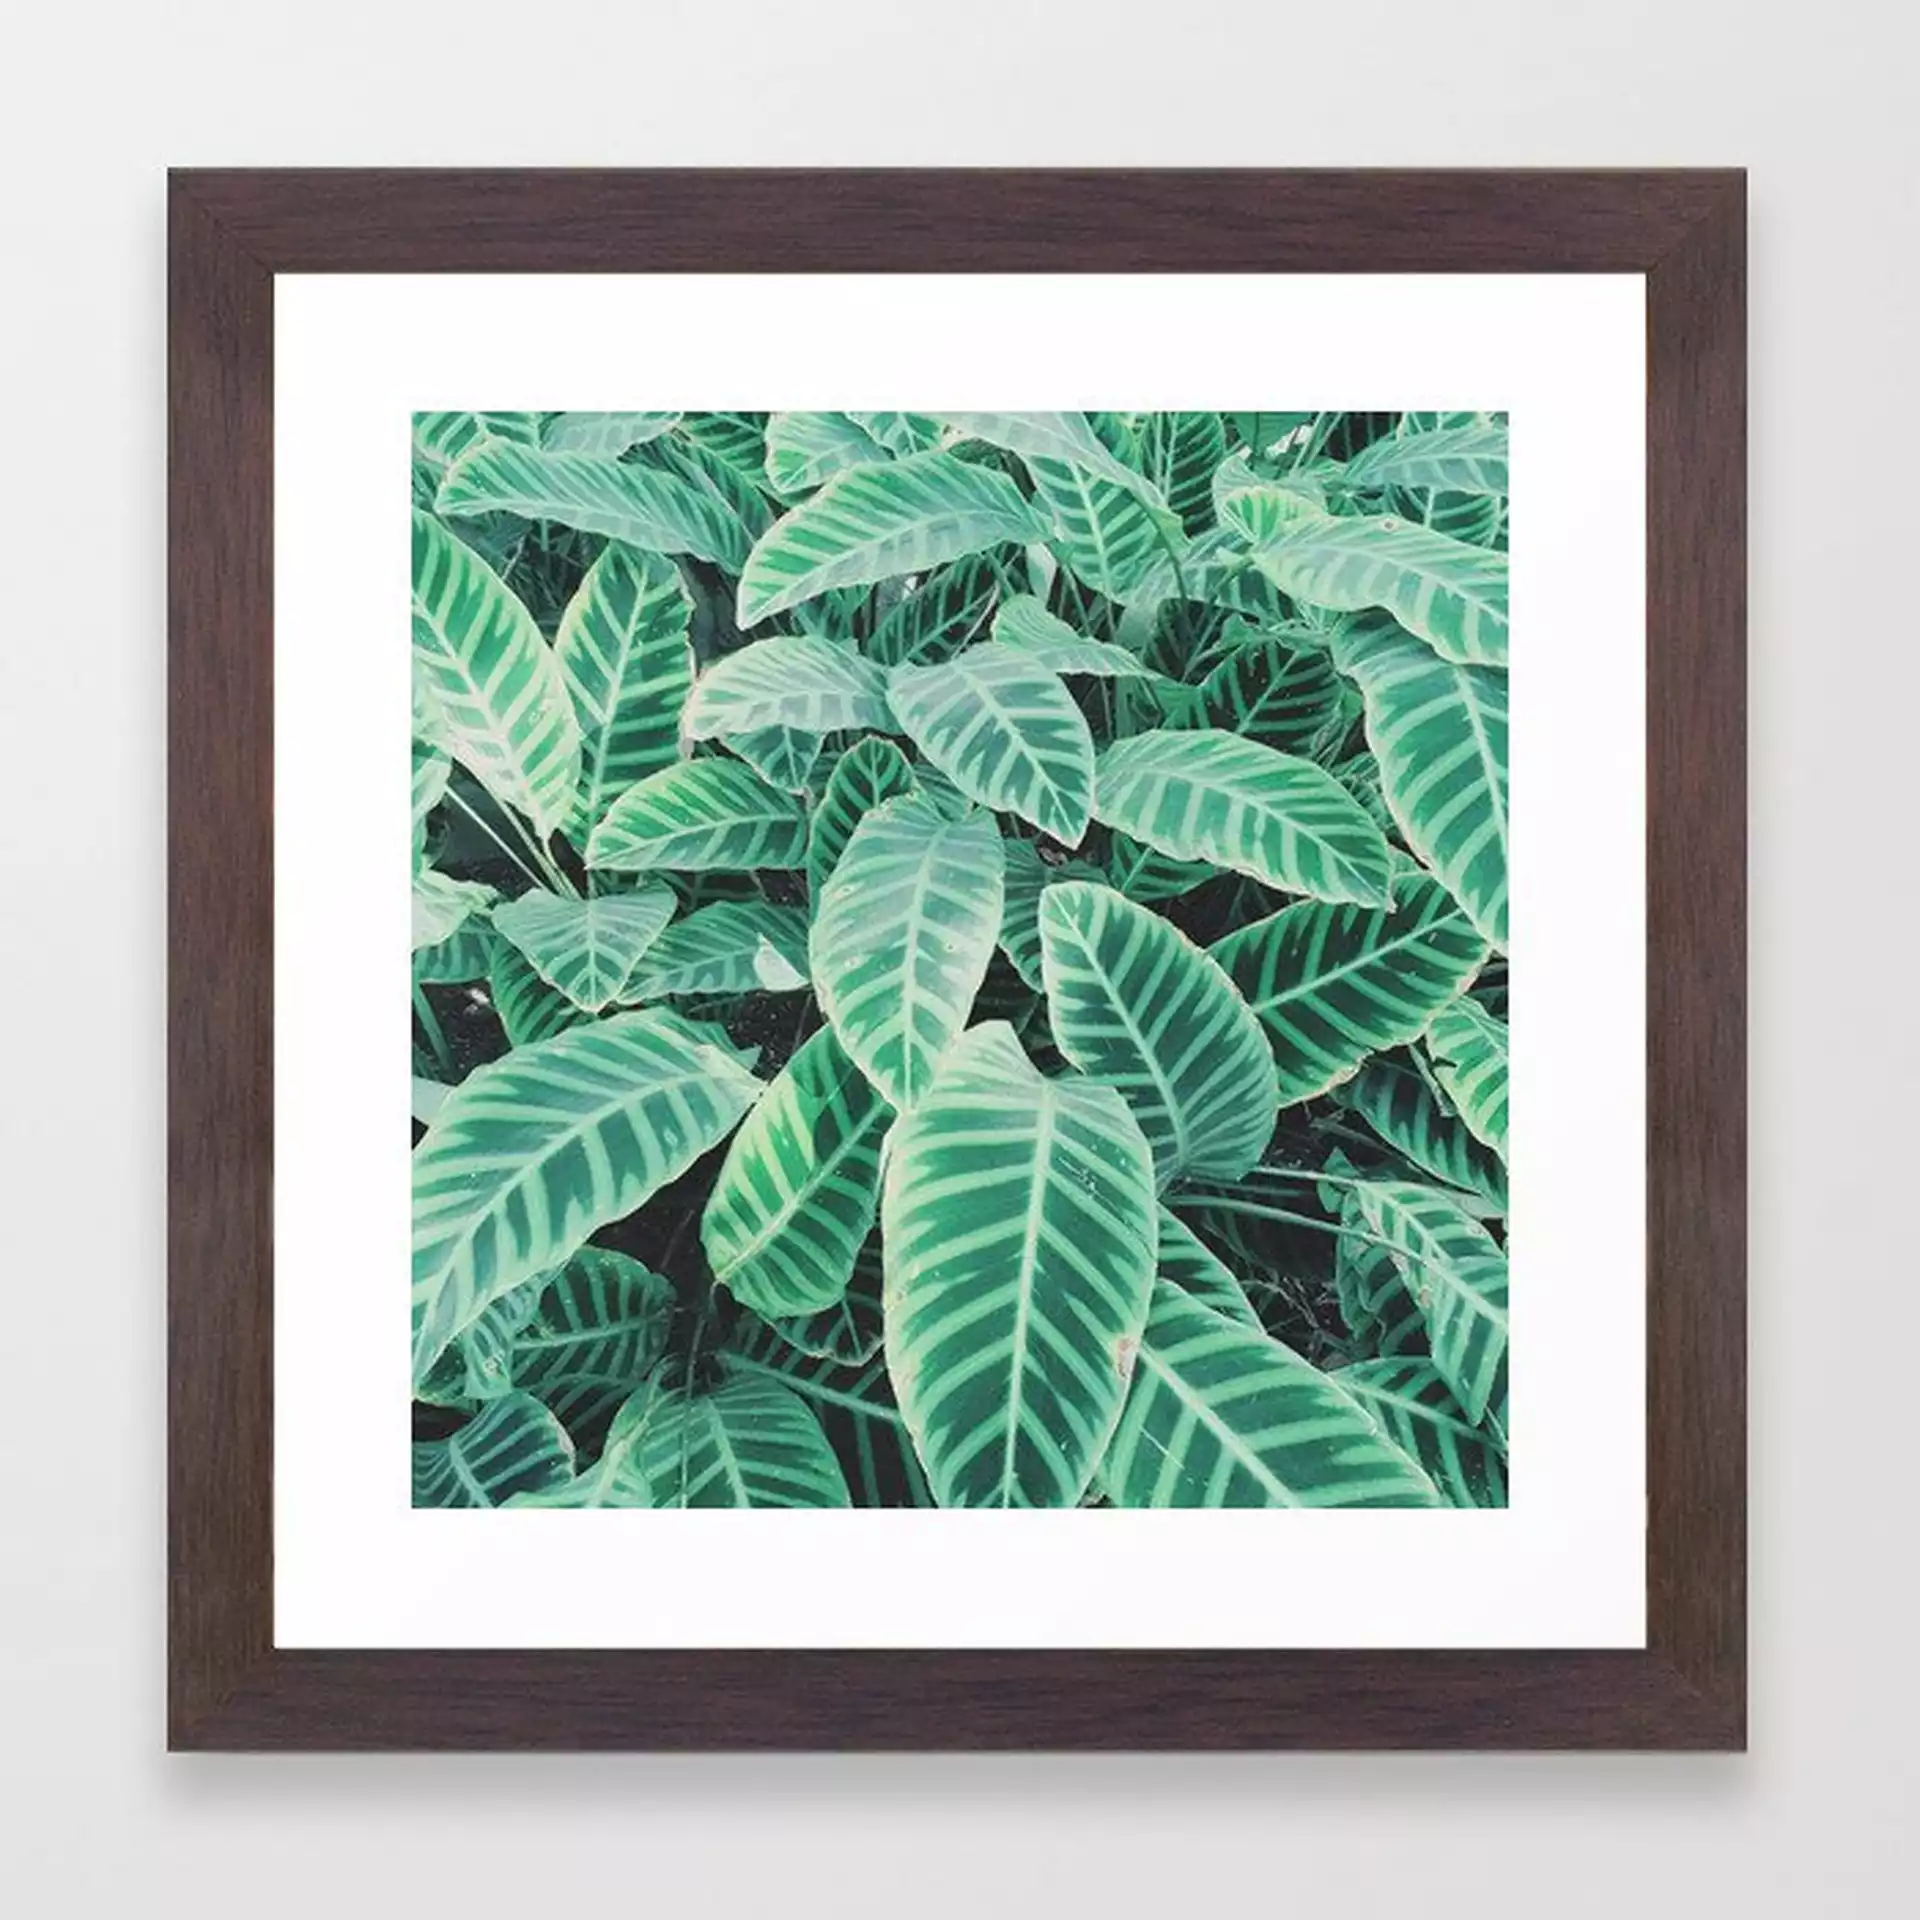 Pattern Of Leaves Framed Art Print by Cassia Beck - Conservation Walnut - X-Small-12x12